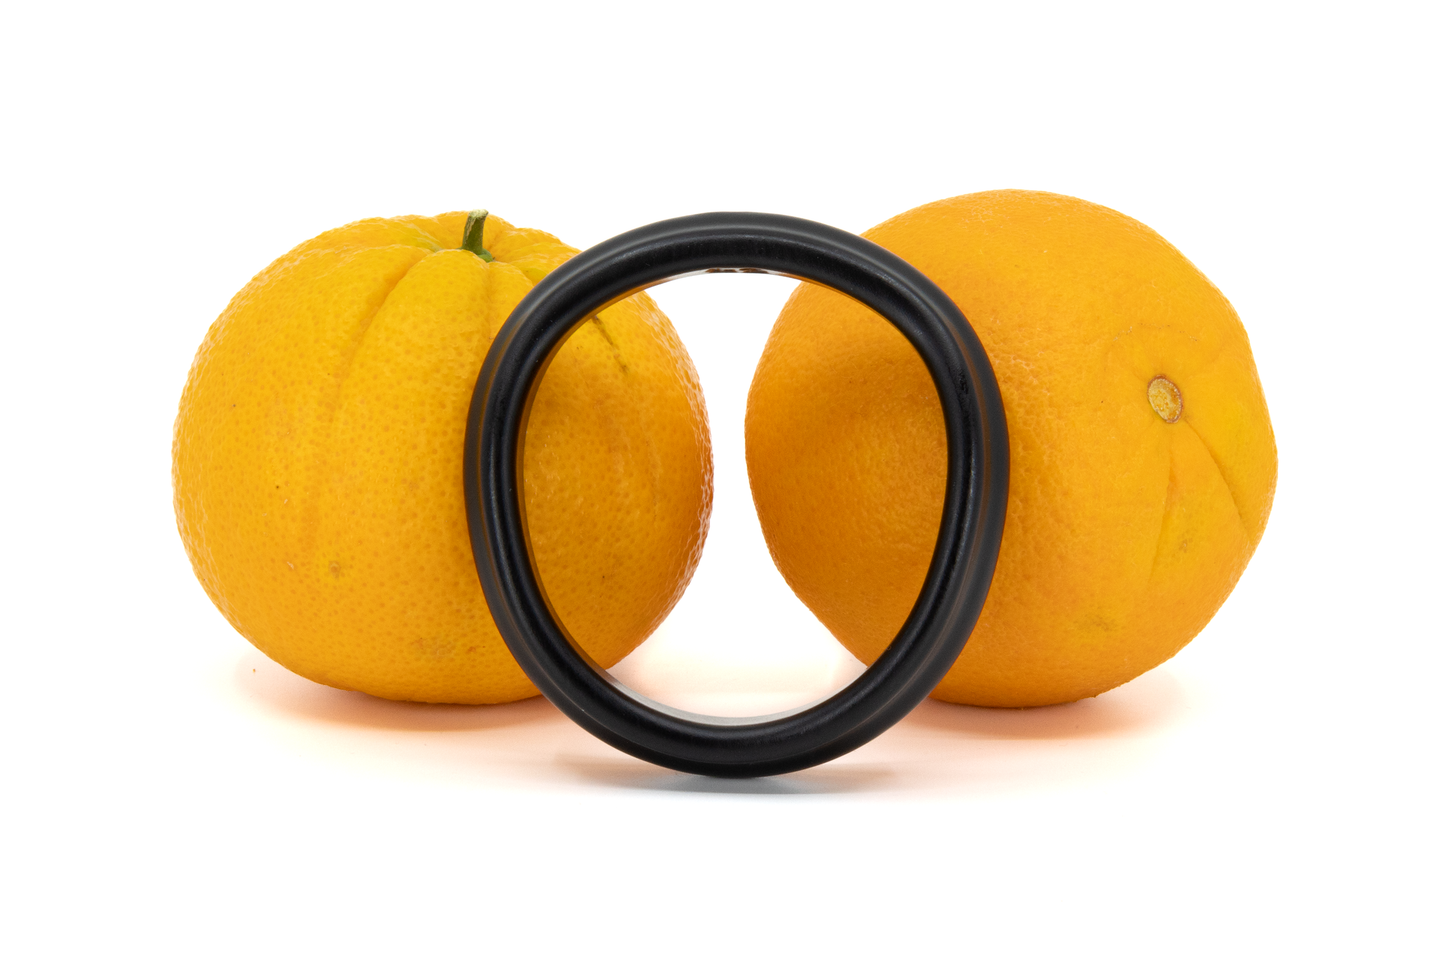 Mk1 Cock Ring Pack (46, 48, 50mm) - Large